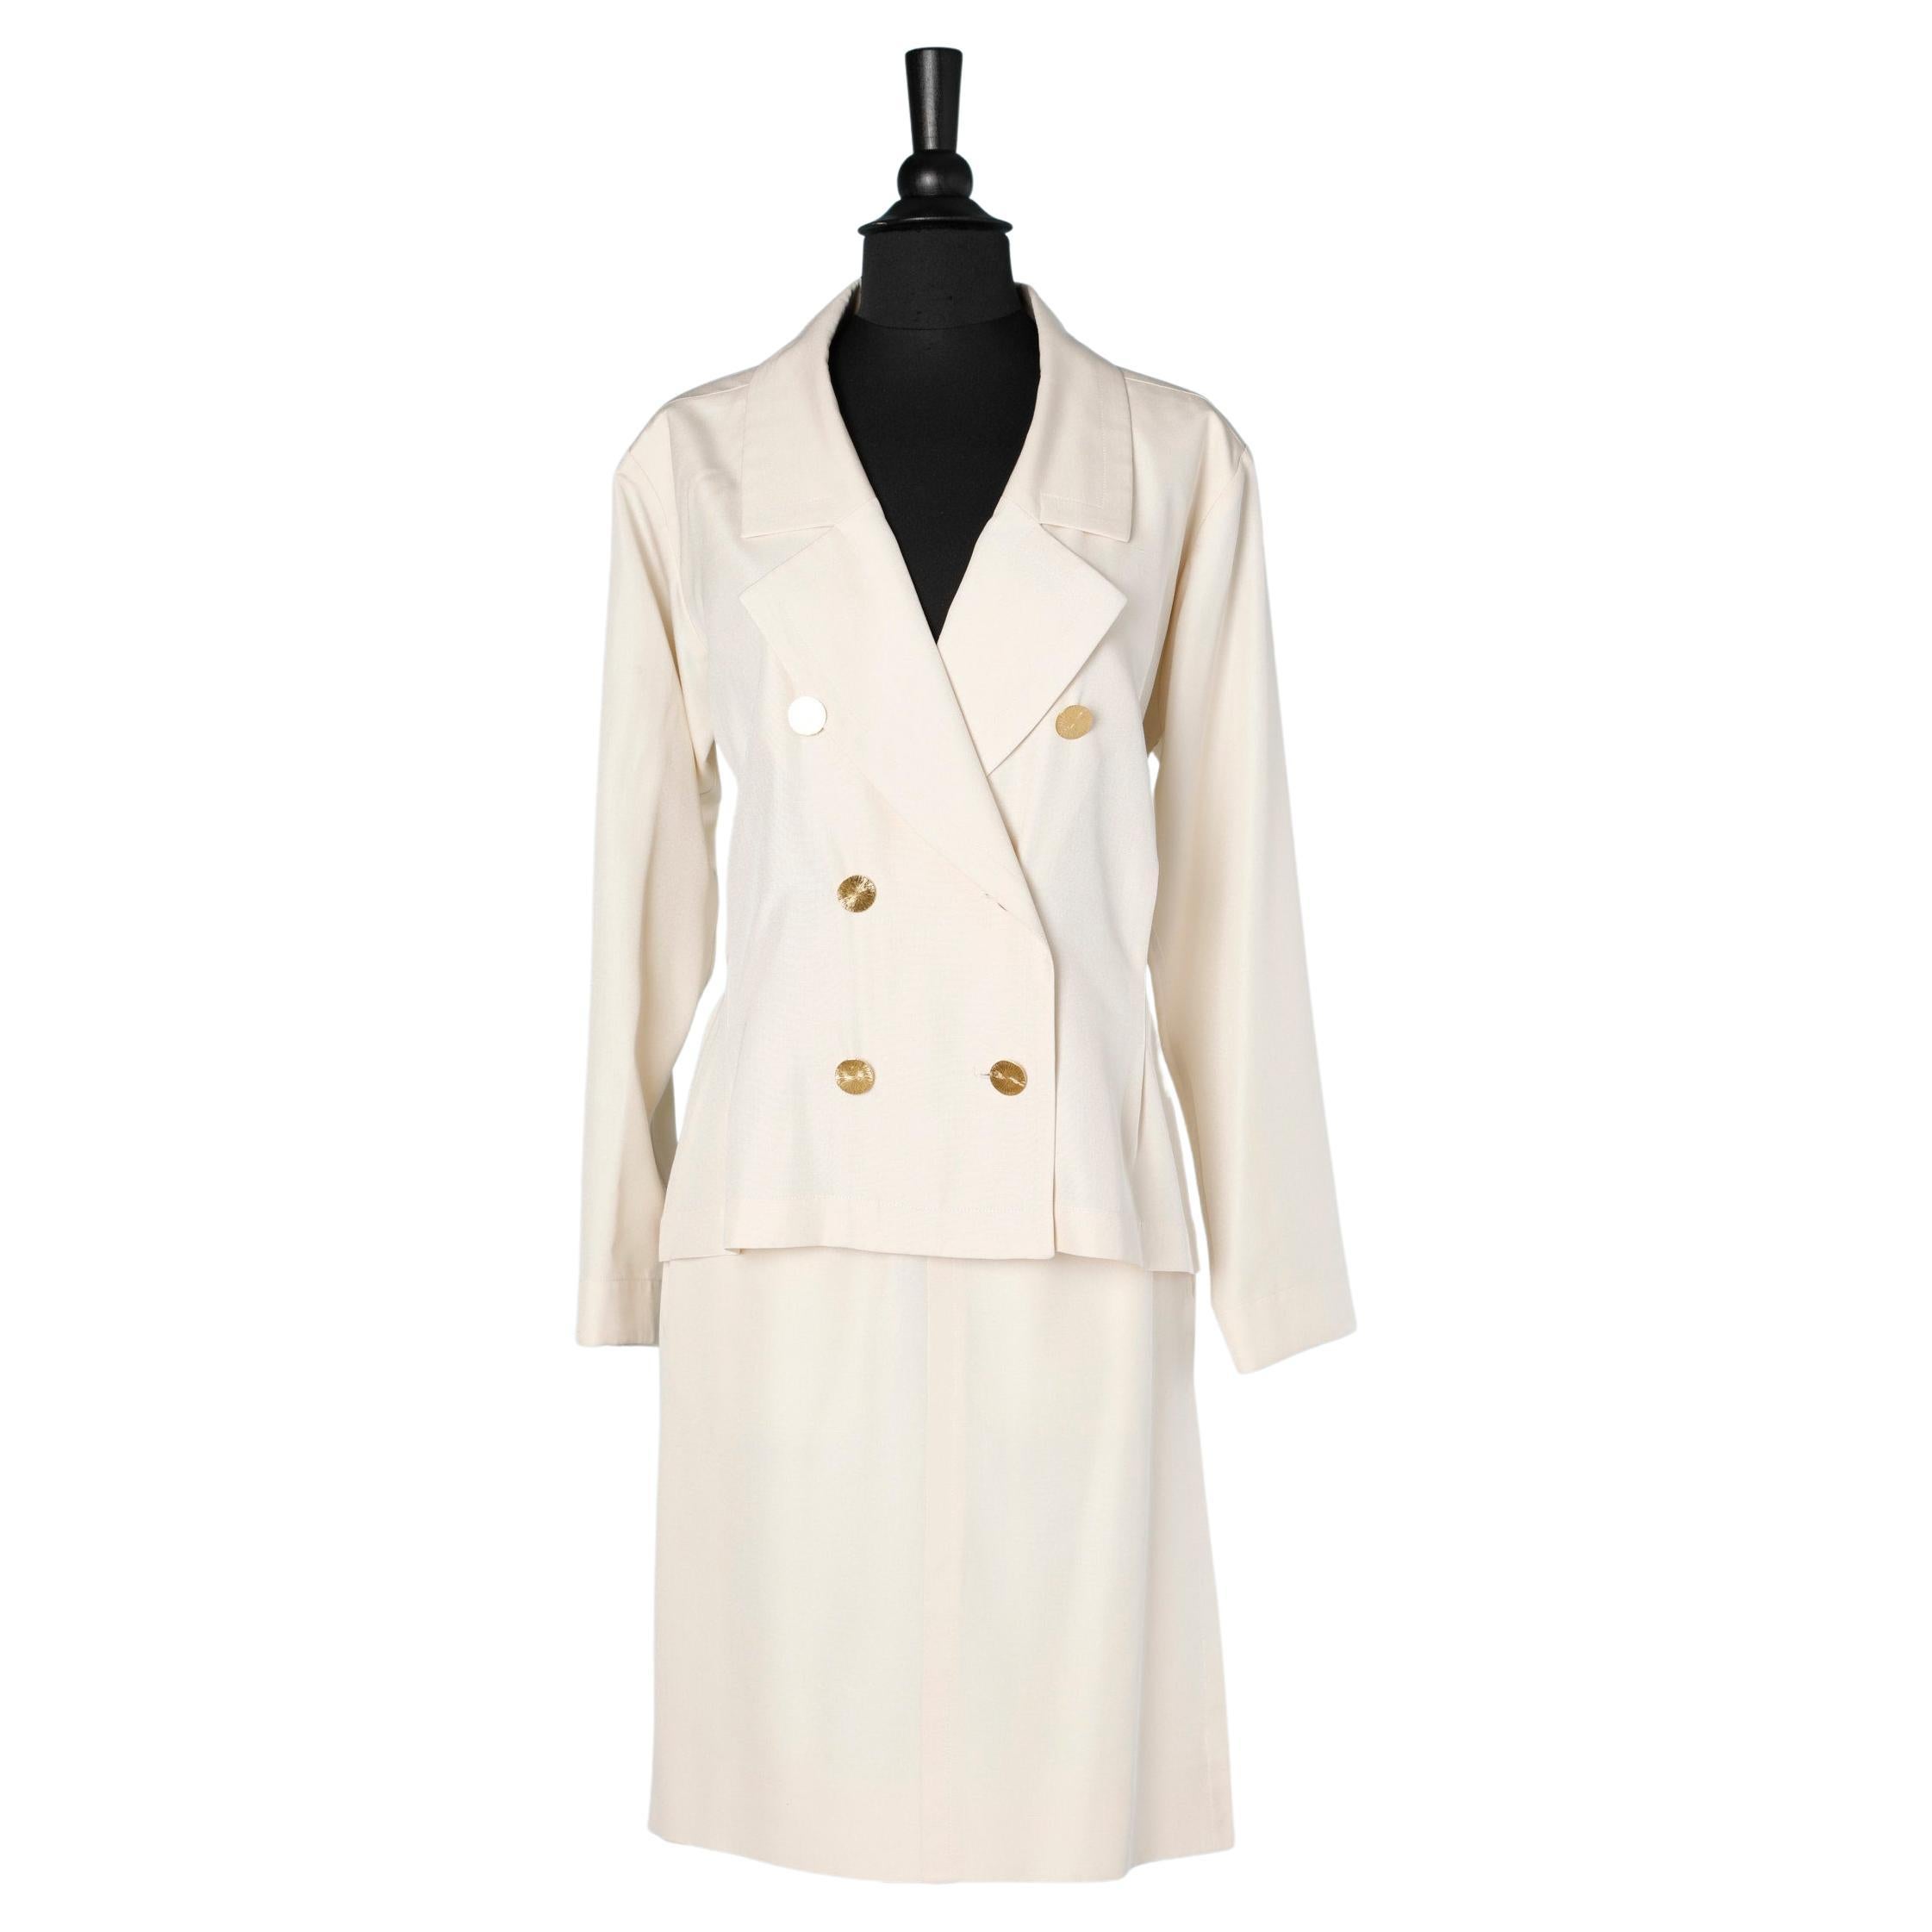 Off-white raw silk skirt-suit  with gold buttons Yves Saint Laurent Rive Gauche  For Sale